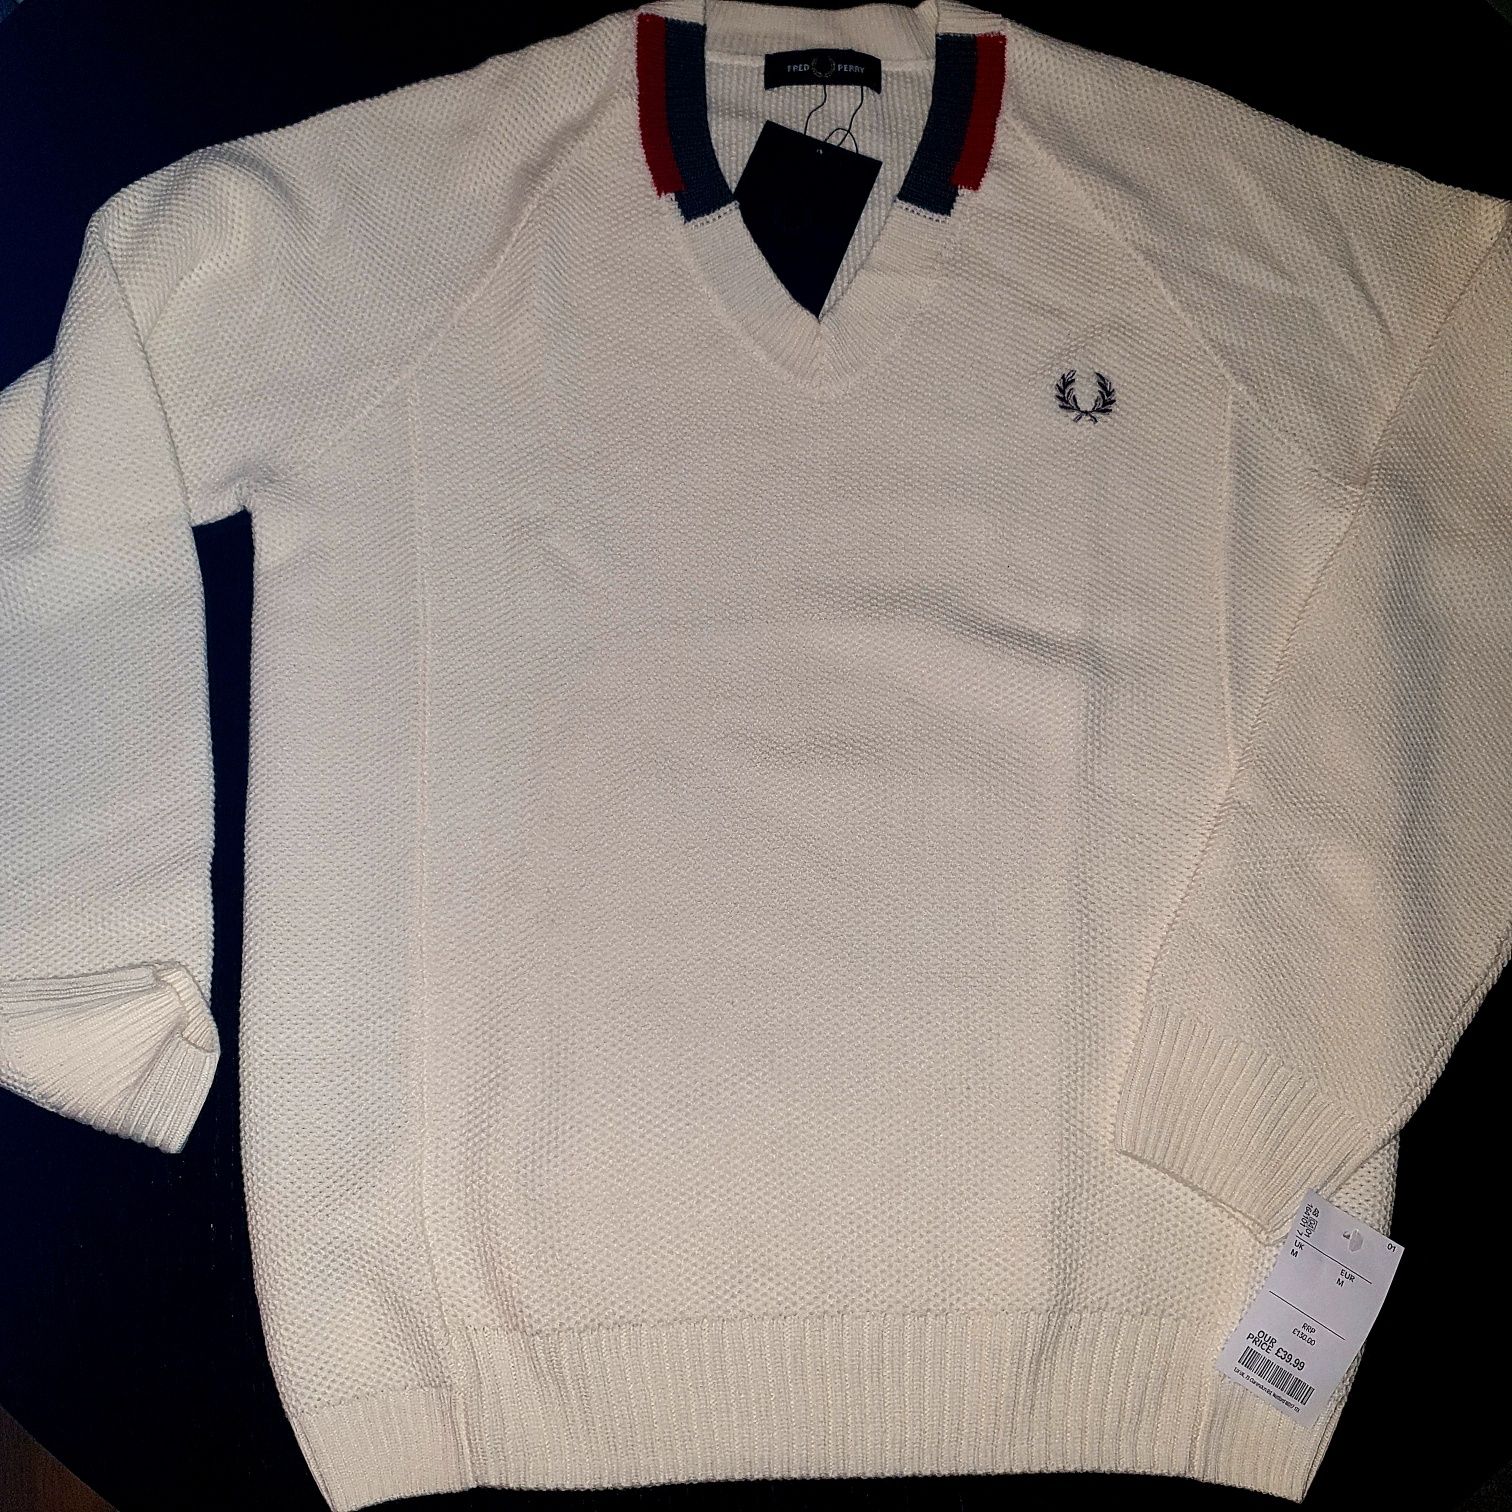 Sweter Fred Perry